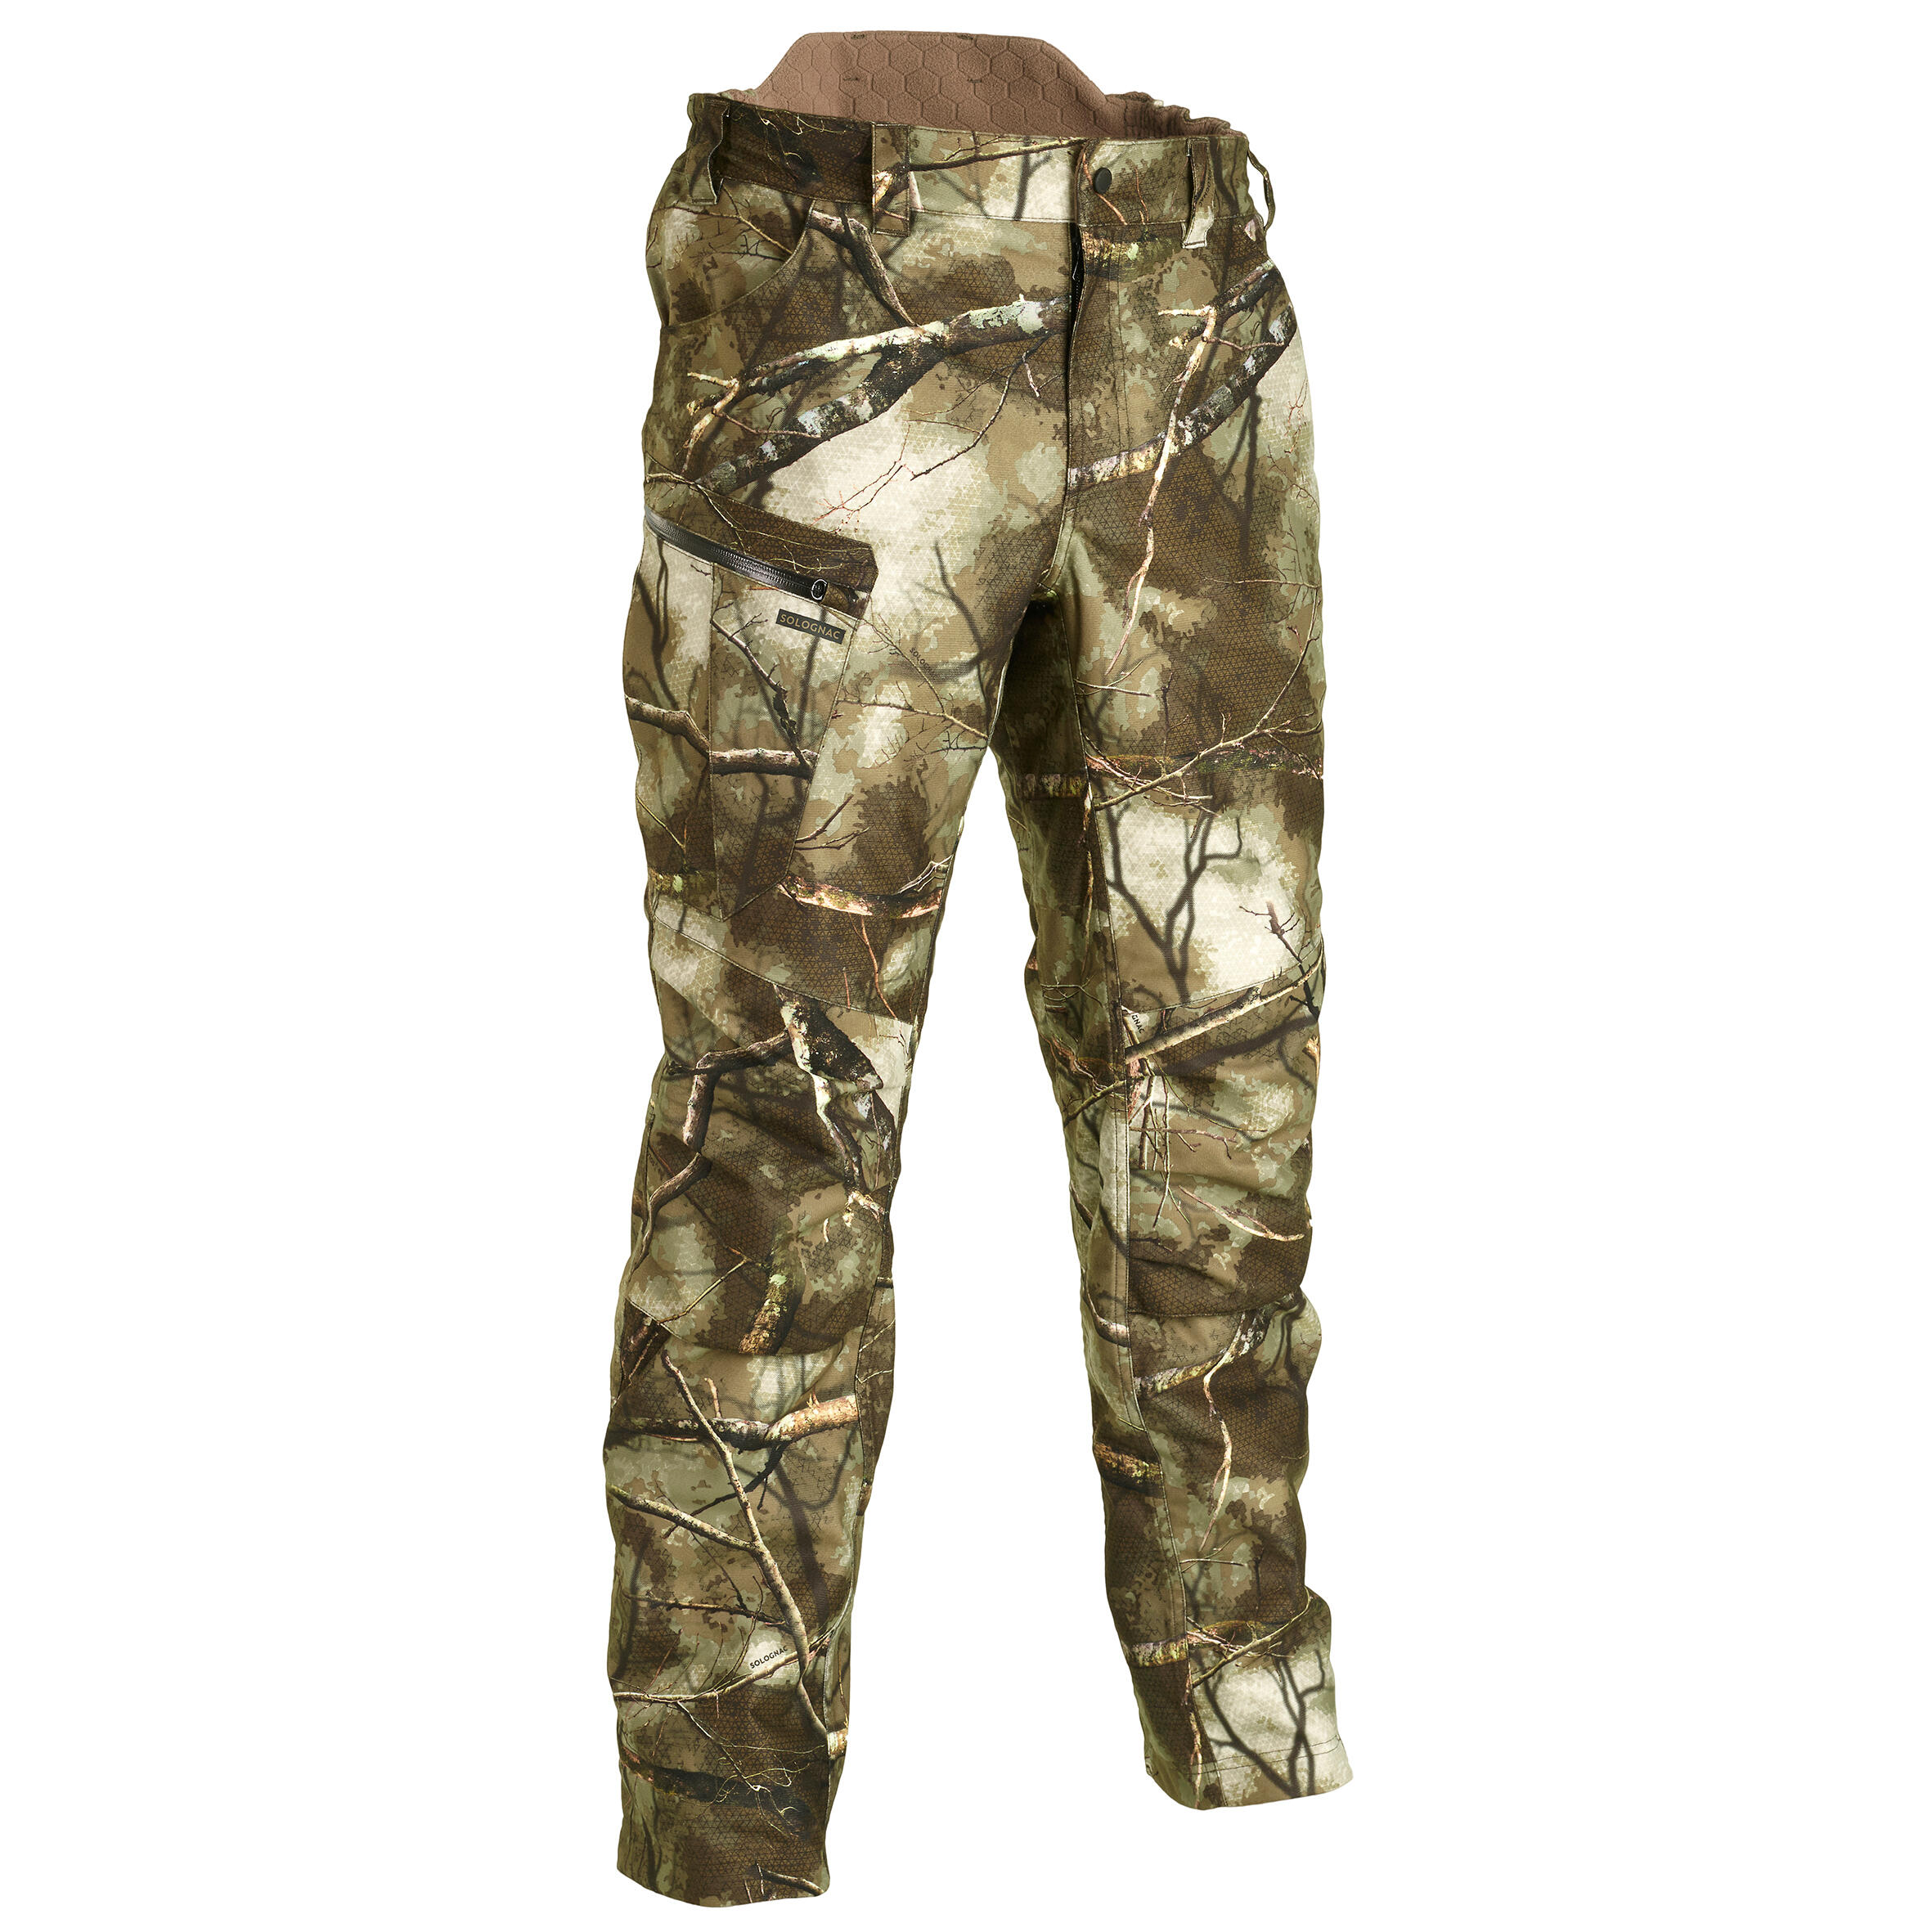 BREATHABLE HUNTING TROUSERS TREEMETIC 500 CAMOUFLAGE  Decathlon